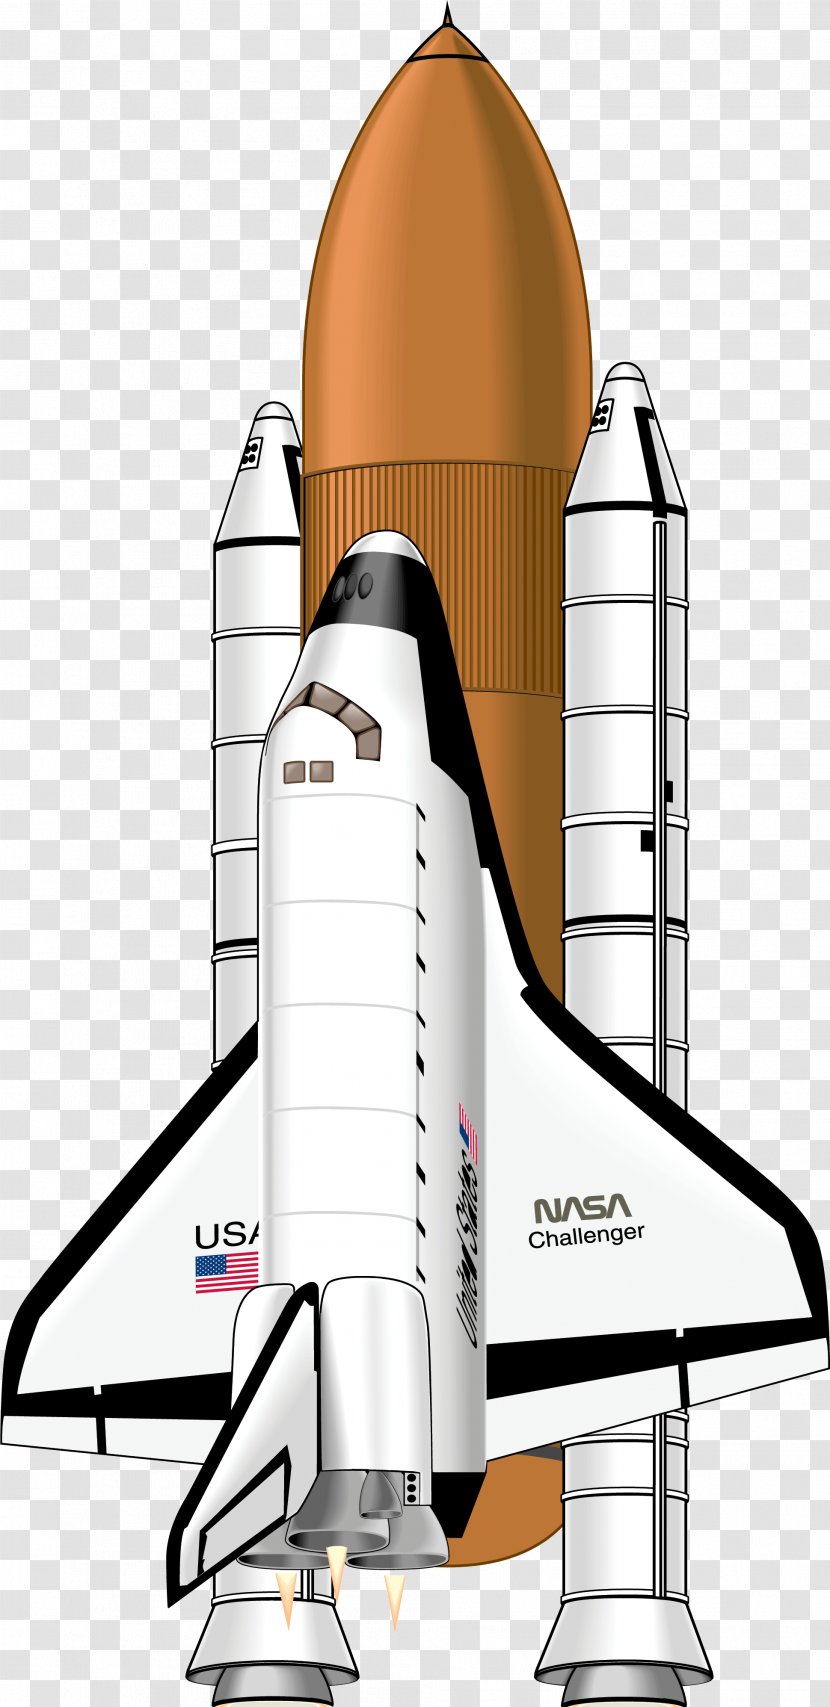 Space Shuttle Challenger Disaster Program Teacher In Project - Experimental Aircraft - Nasa Transparent PNG